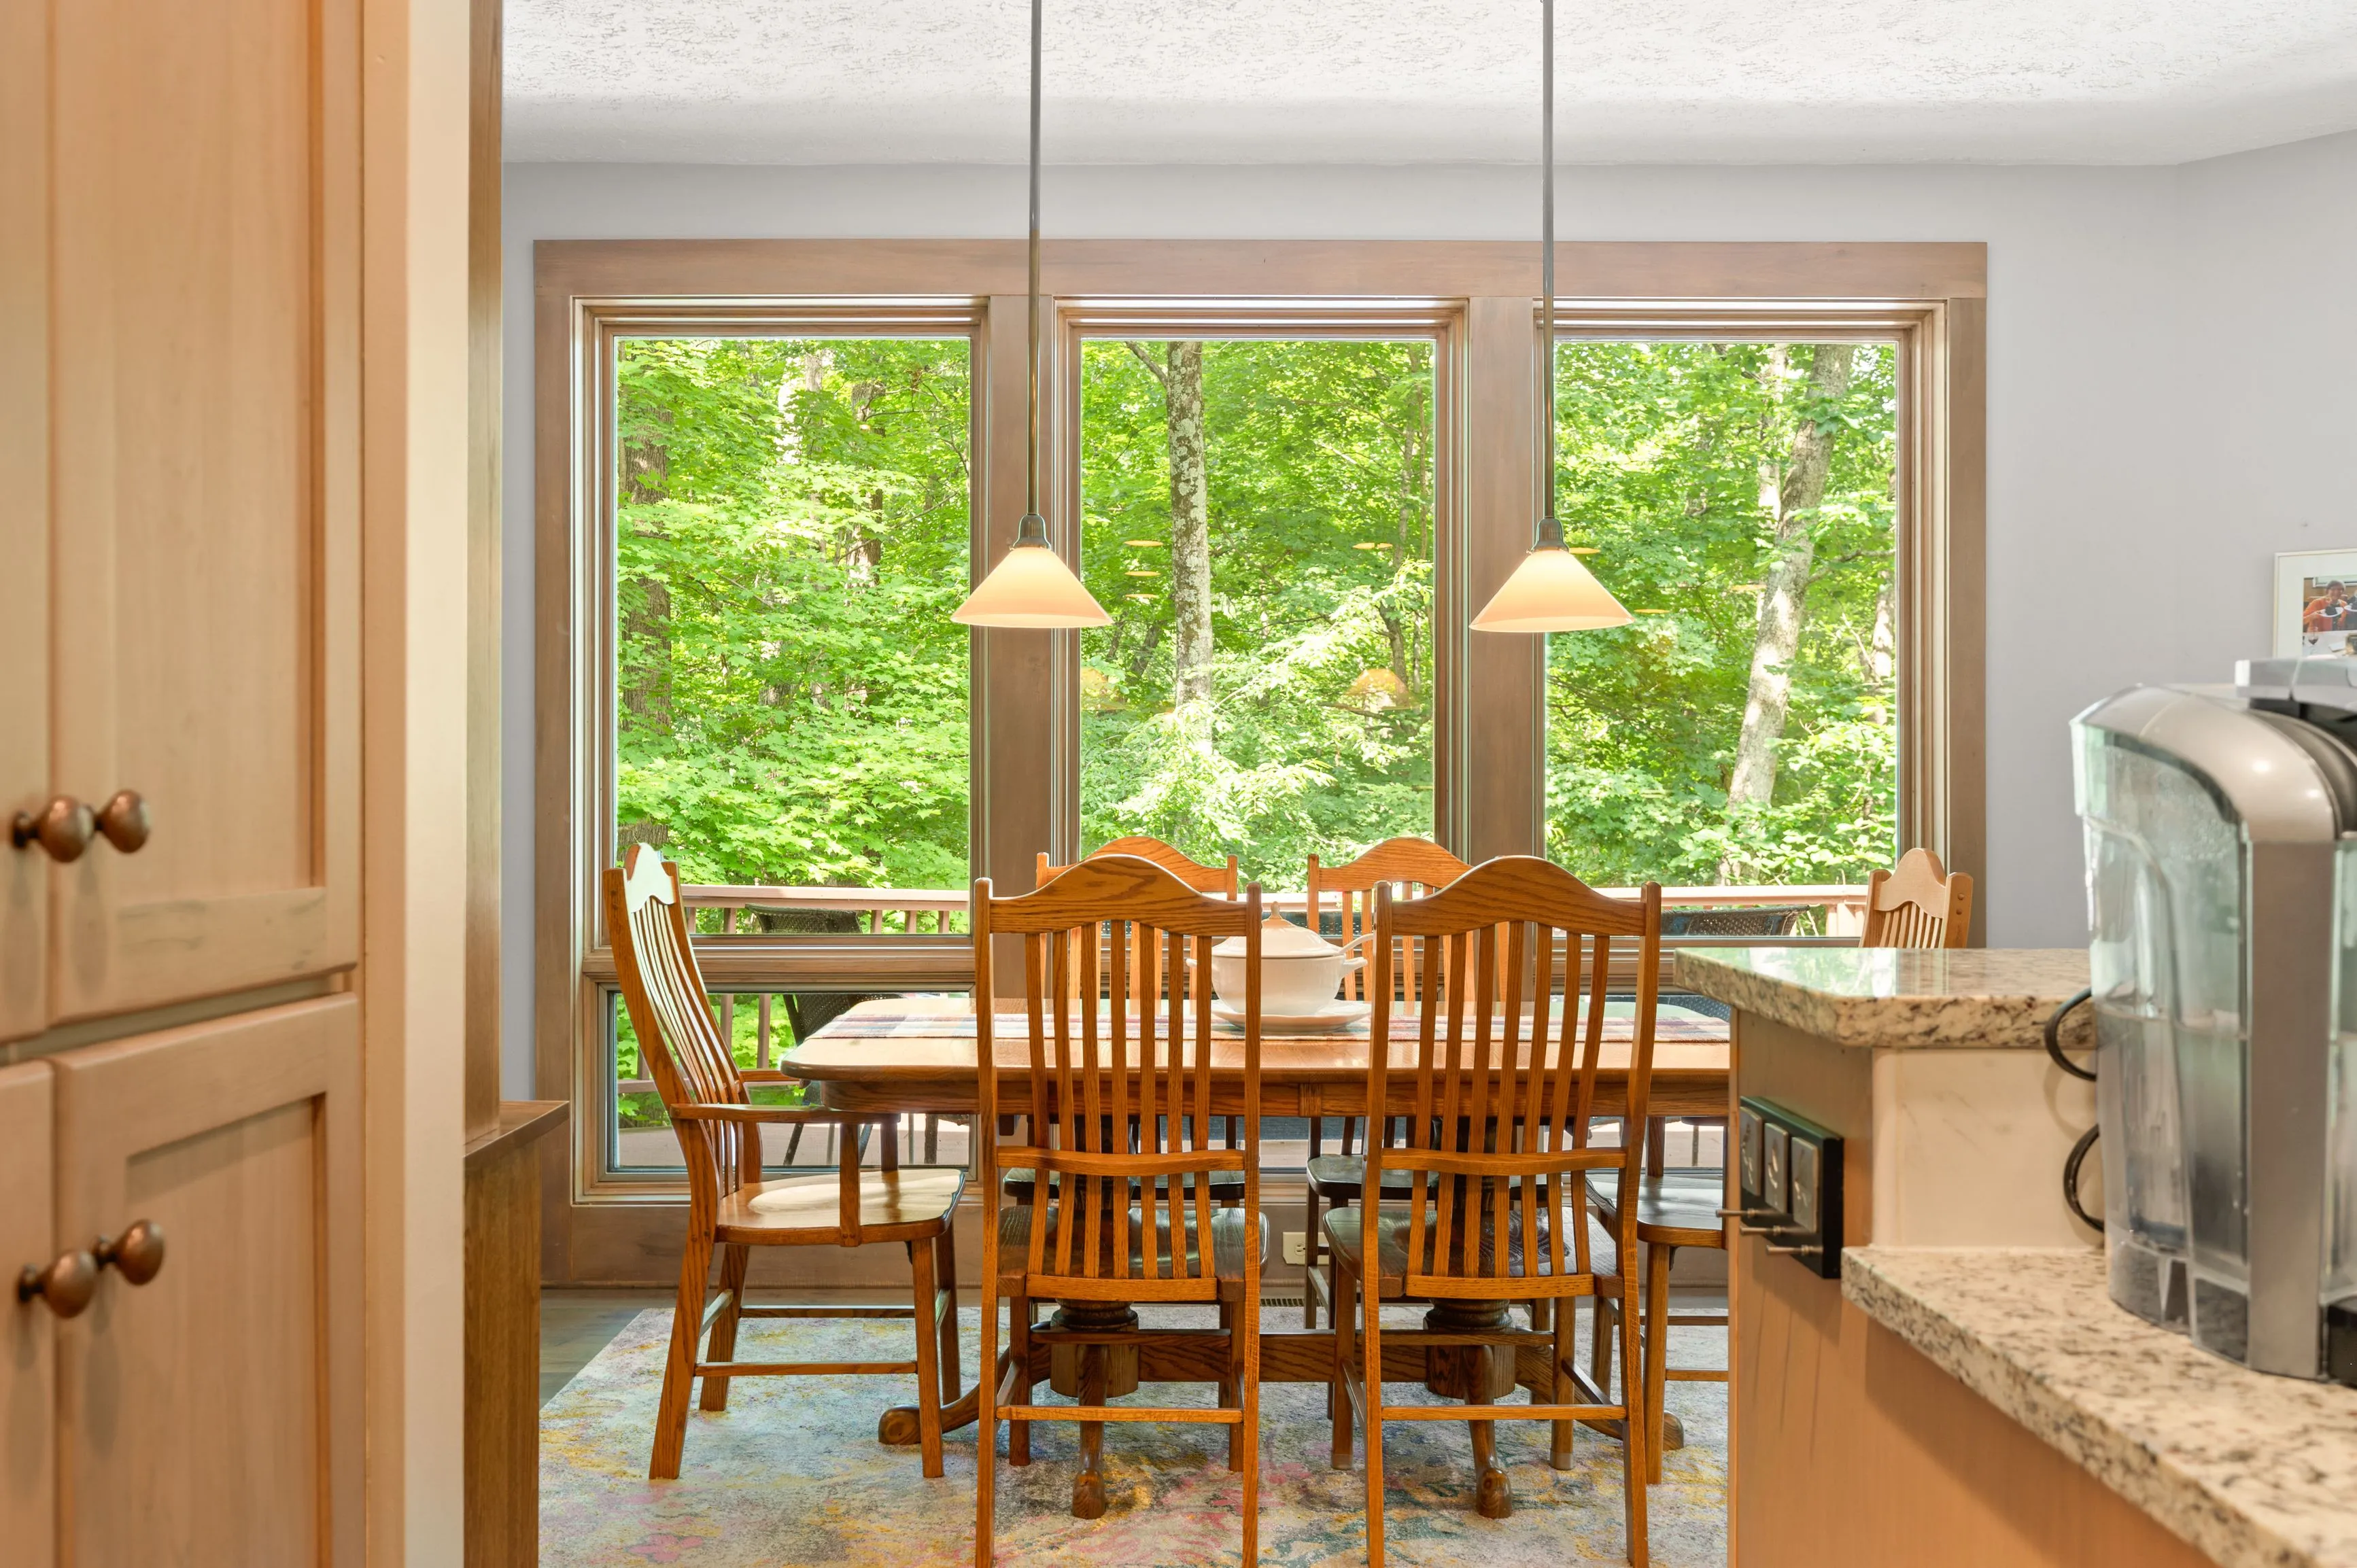 Cozy breakfast nook with wooden table and chairs, pendant lights, surrounded by large windows with a green forest view.